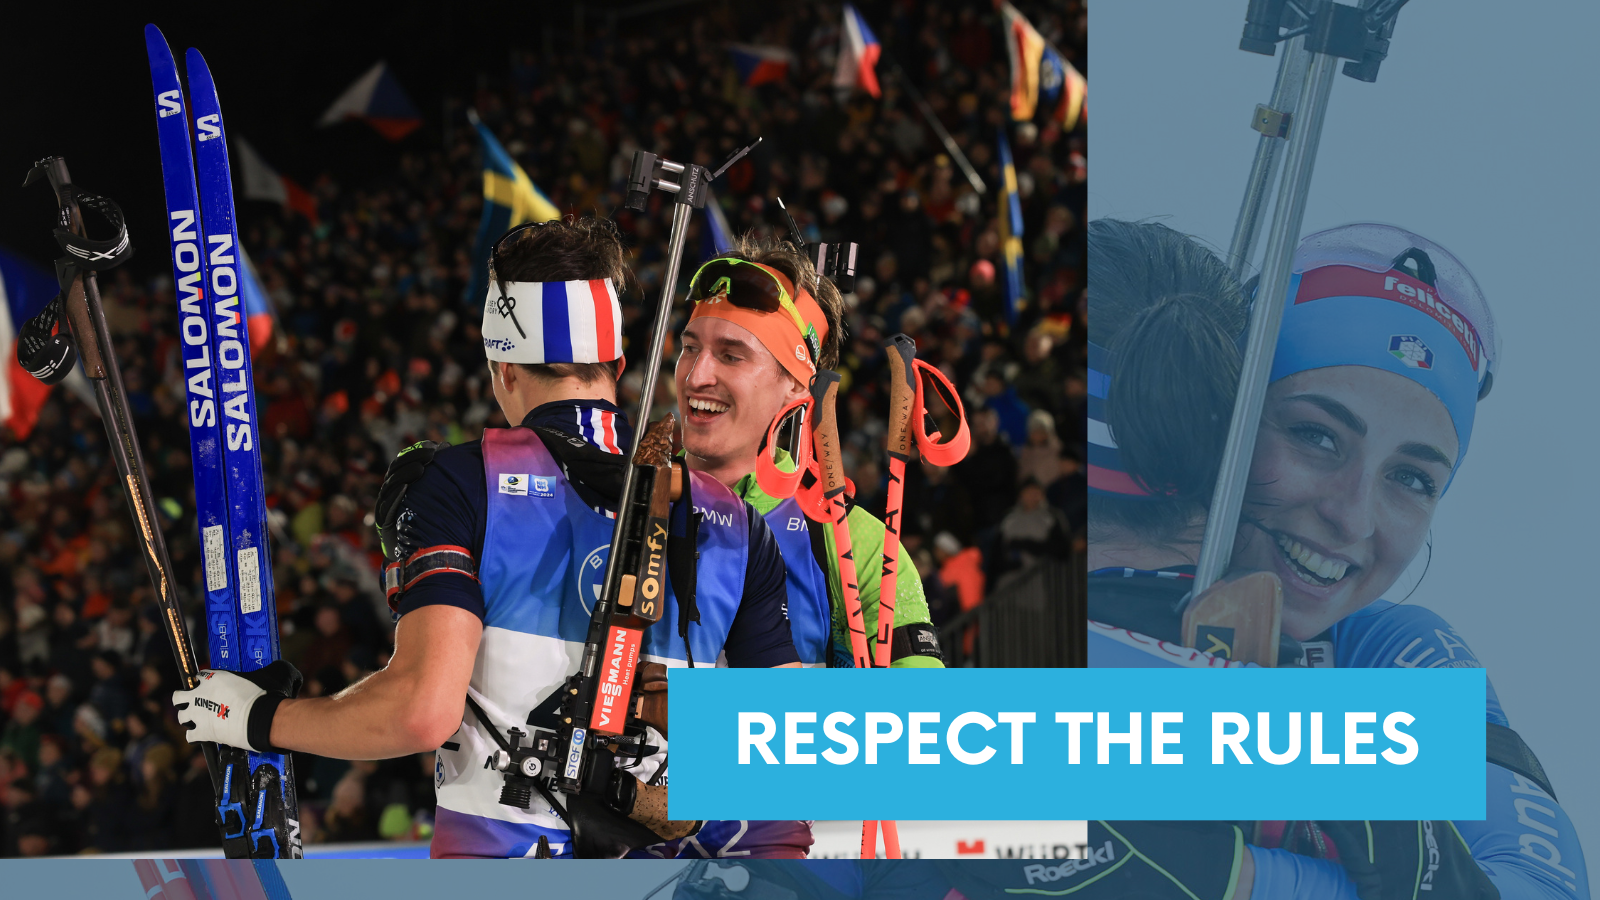 Respect the rules: maintain biathlon’s integrity